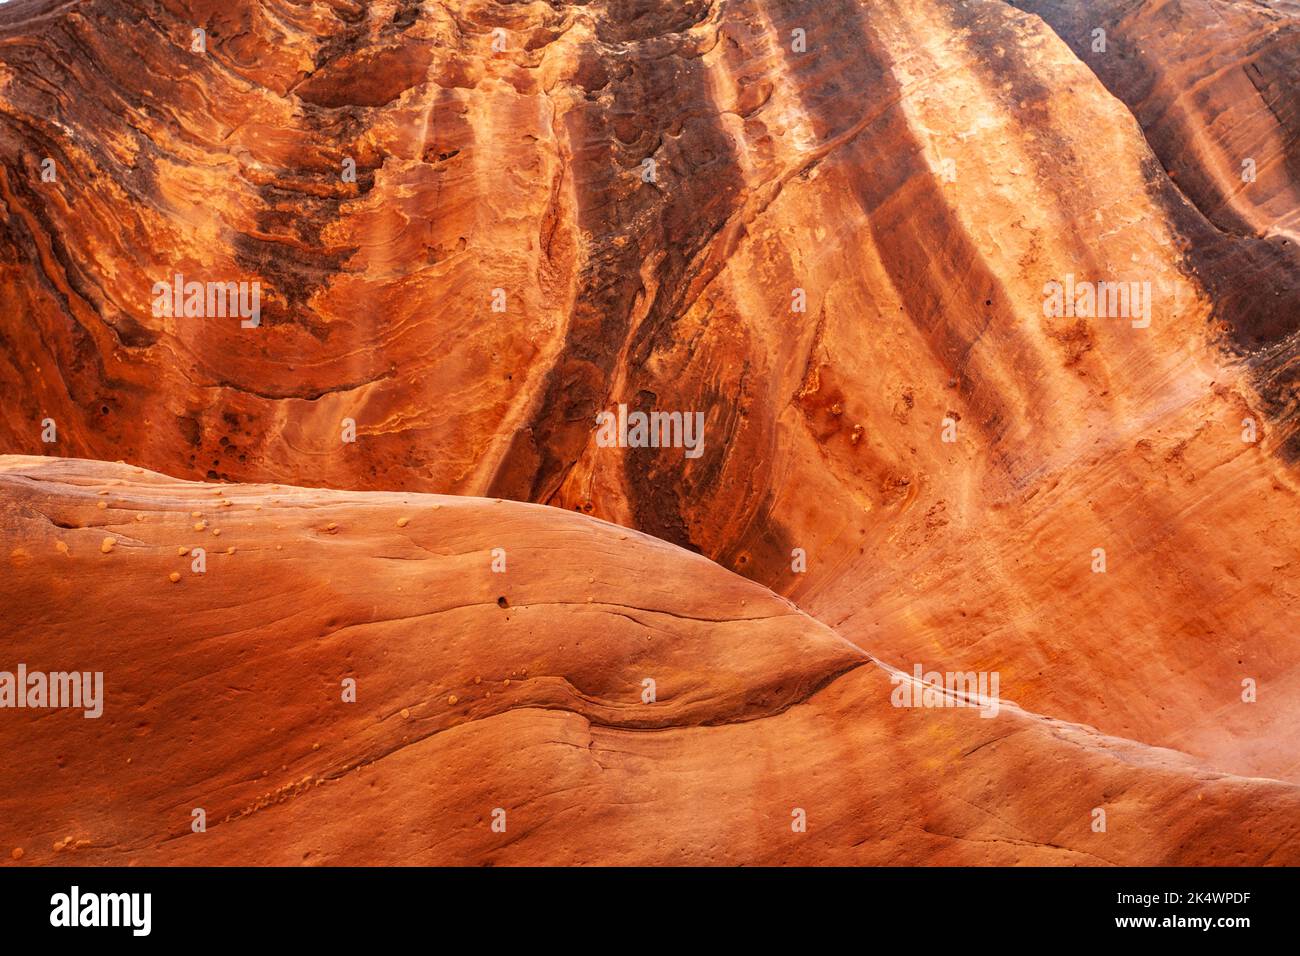 Desert varnish on the wall of Holeman Slot canyon carved by rushing water over thousands of years in Canyonlands National Park, Utah. Stock Photo